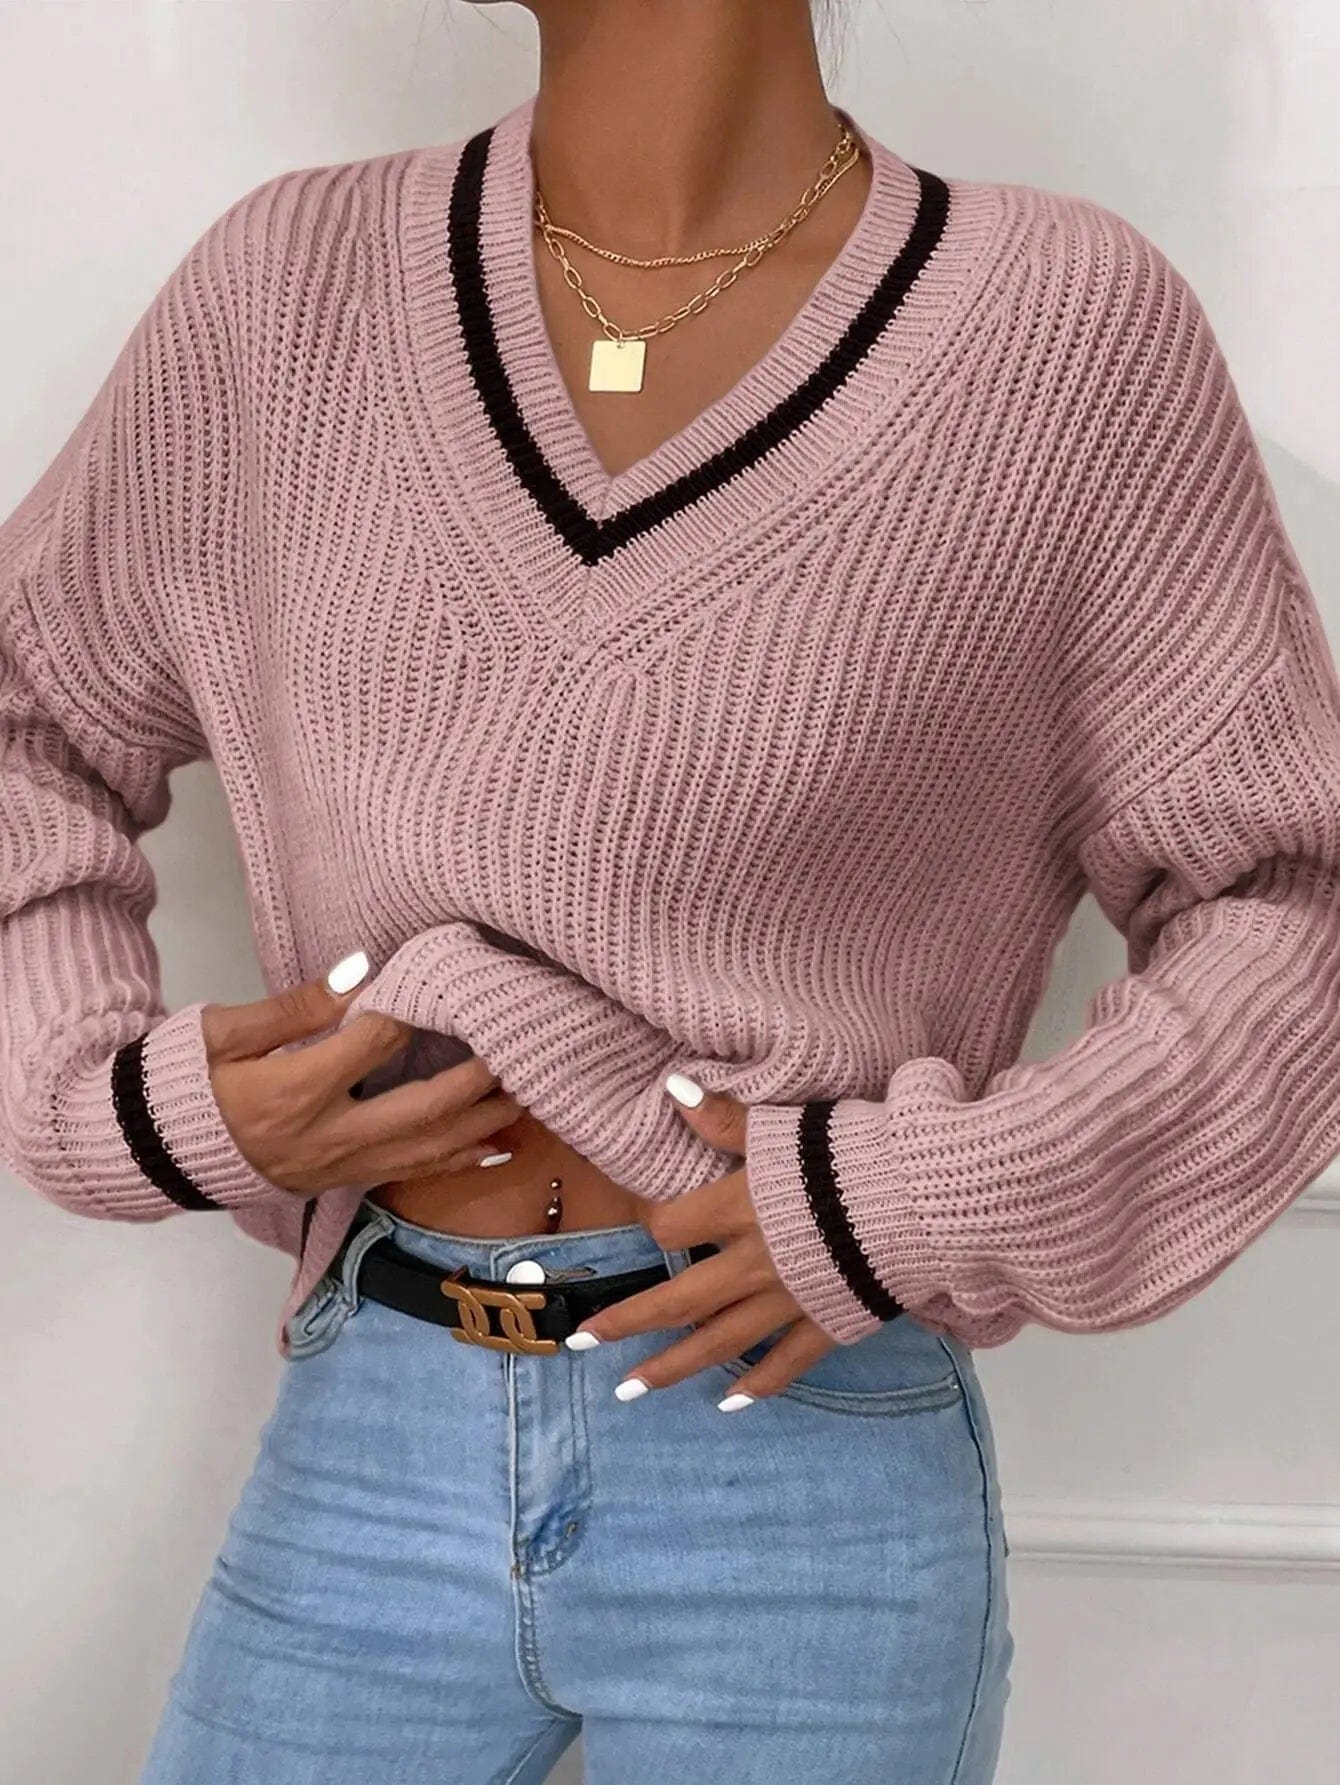 Cheky Pink / S Women's Clothes Cable Knit V Neck Sweaters Casual Long Sleeve Striped Pullover Sweater Trendy Loose Preppy Jumper Top